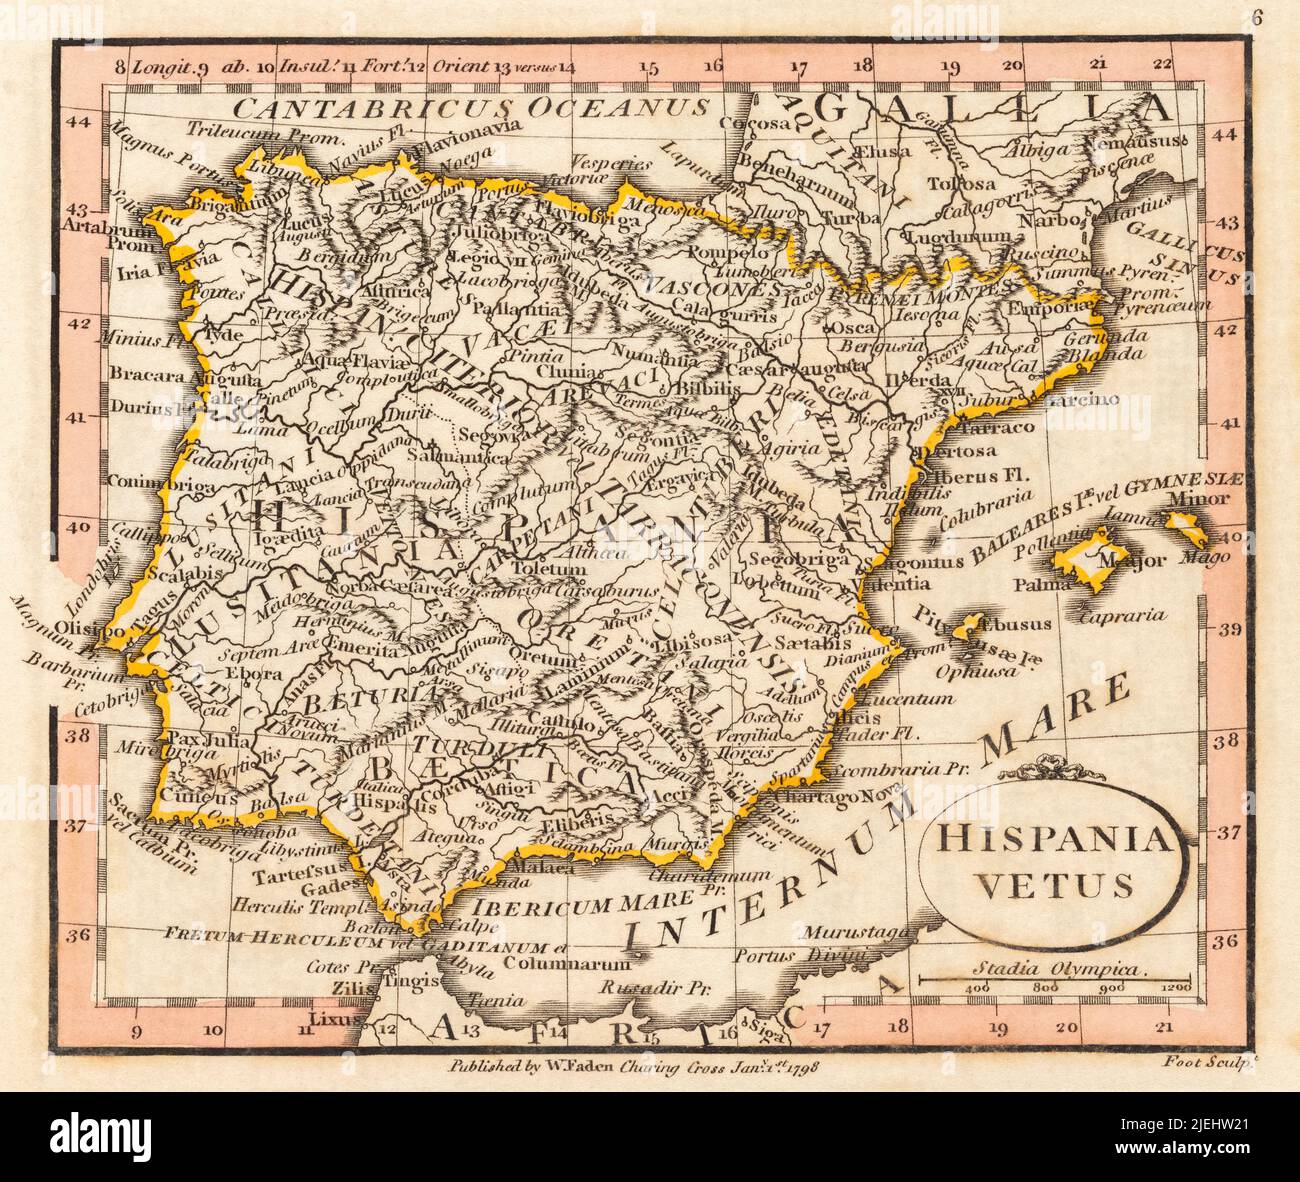 Hispania vetus.  Ancient Spain. 1798 map by cartographer William Faden, engraved by Foot.  Faden was the royal geographer to King George III.  This map comes from his Atlas minimus universalis which was designed mainly for use in schools. Stock Photo